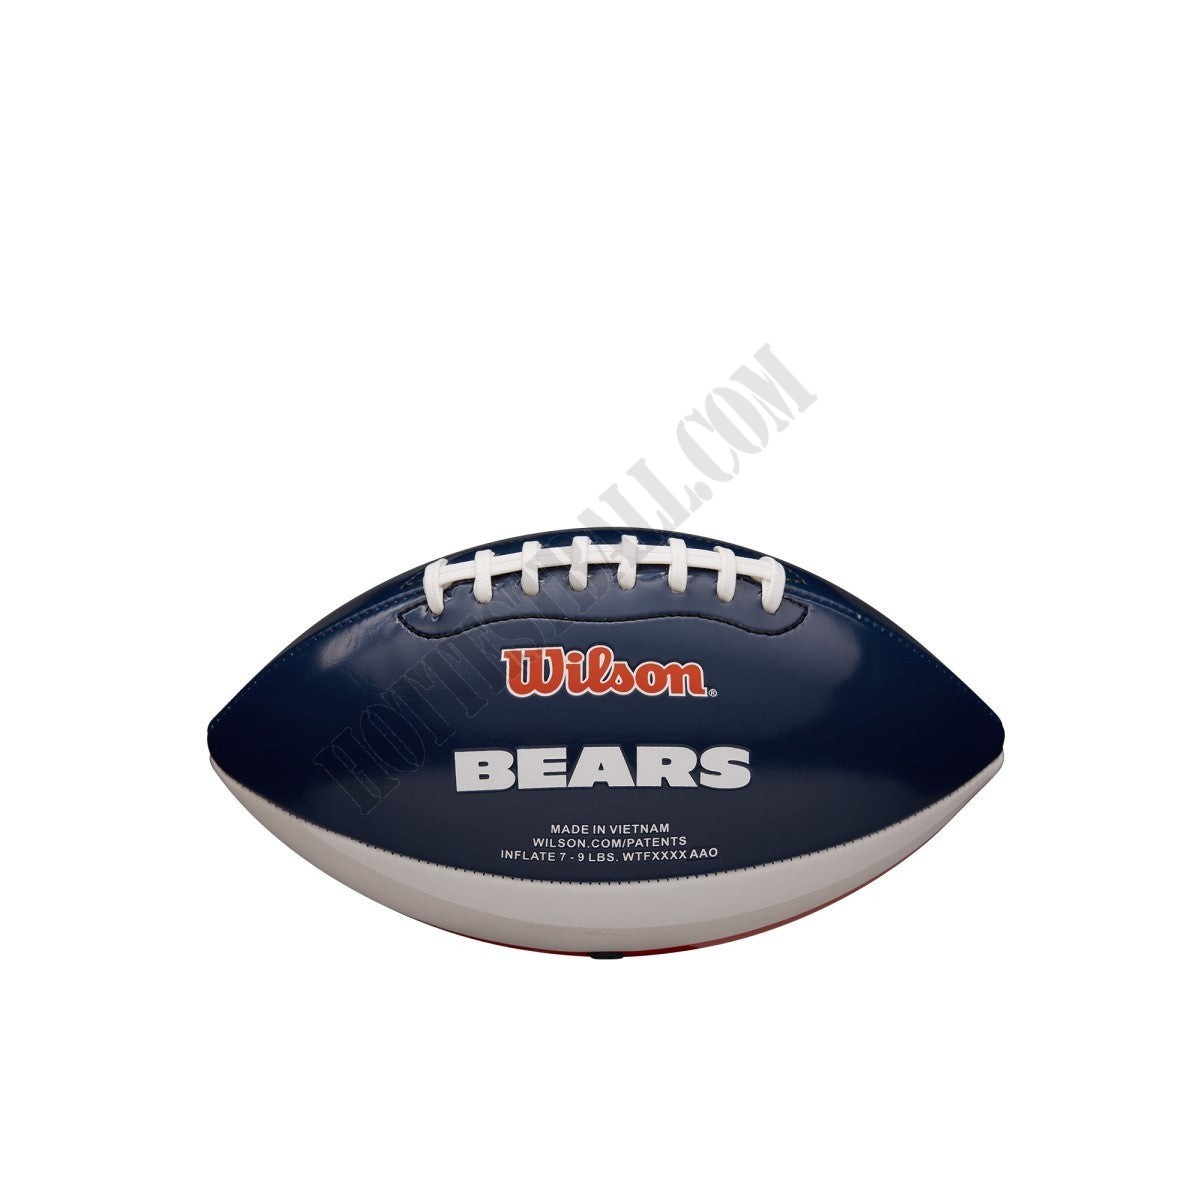 NFL City Pride Football - Chicago Bears ● Wilson Promotions - -1